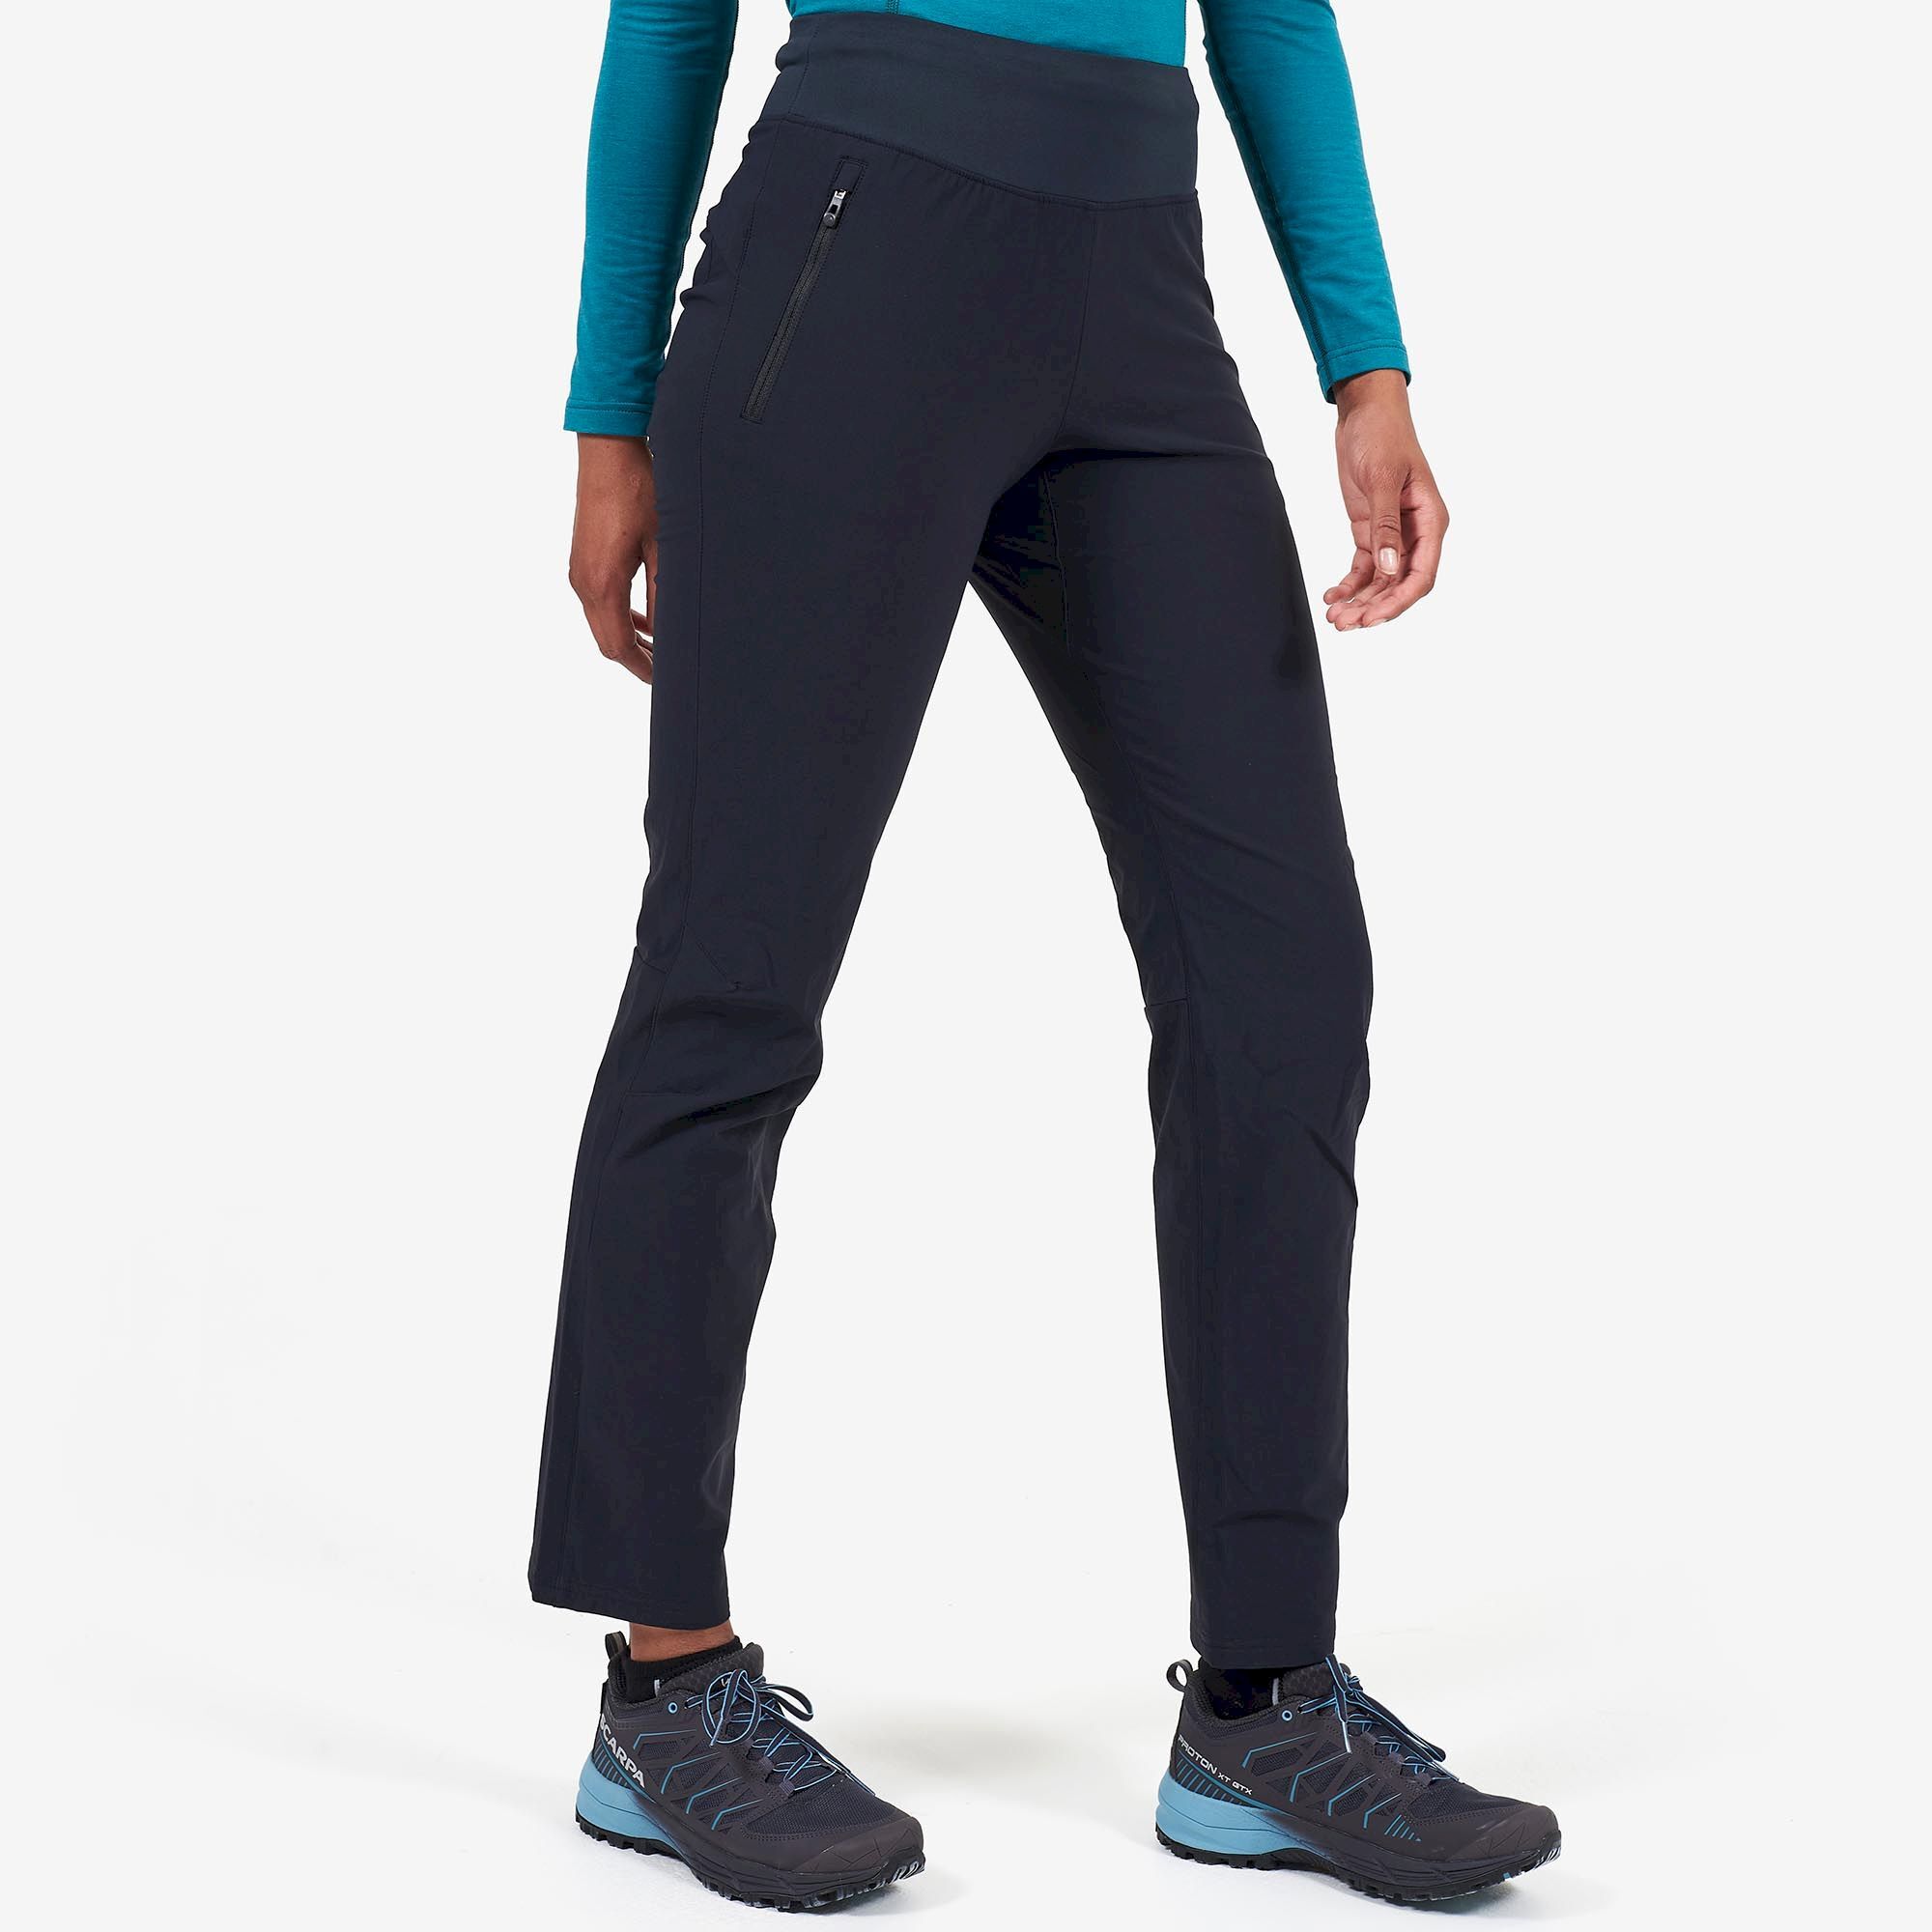 Montane Tucana Mission Pants - Softshell trousers - Women's